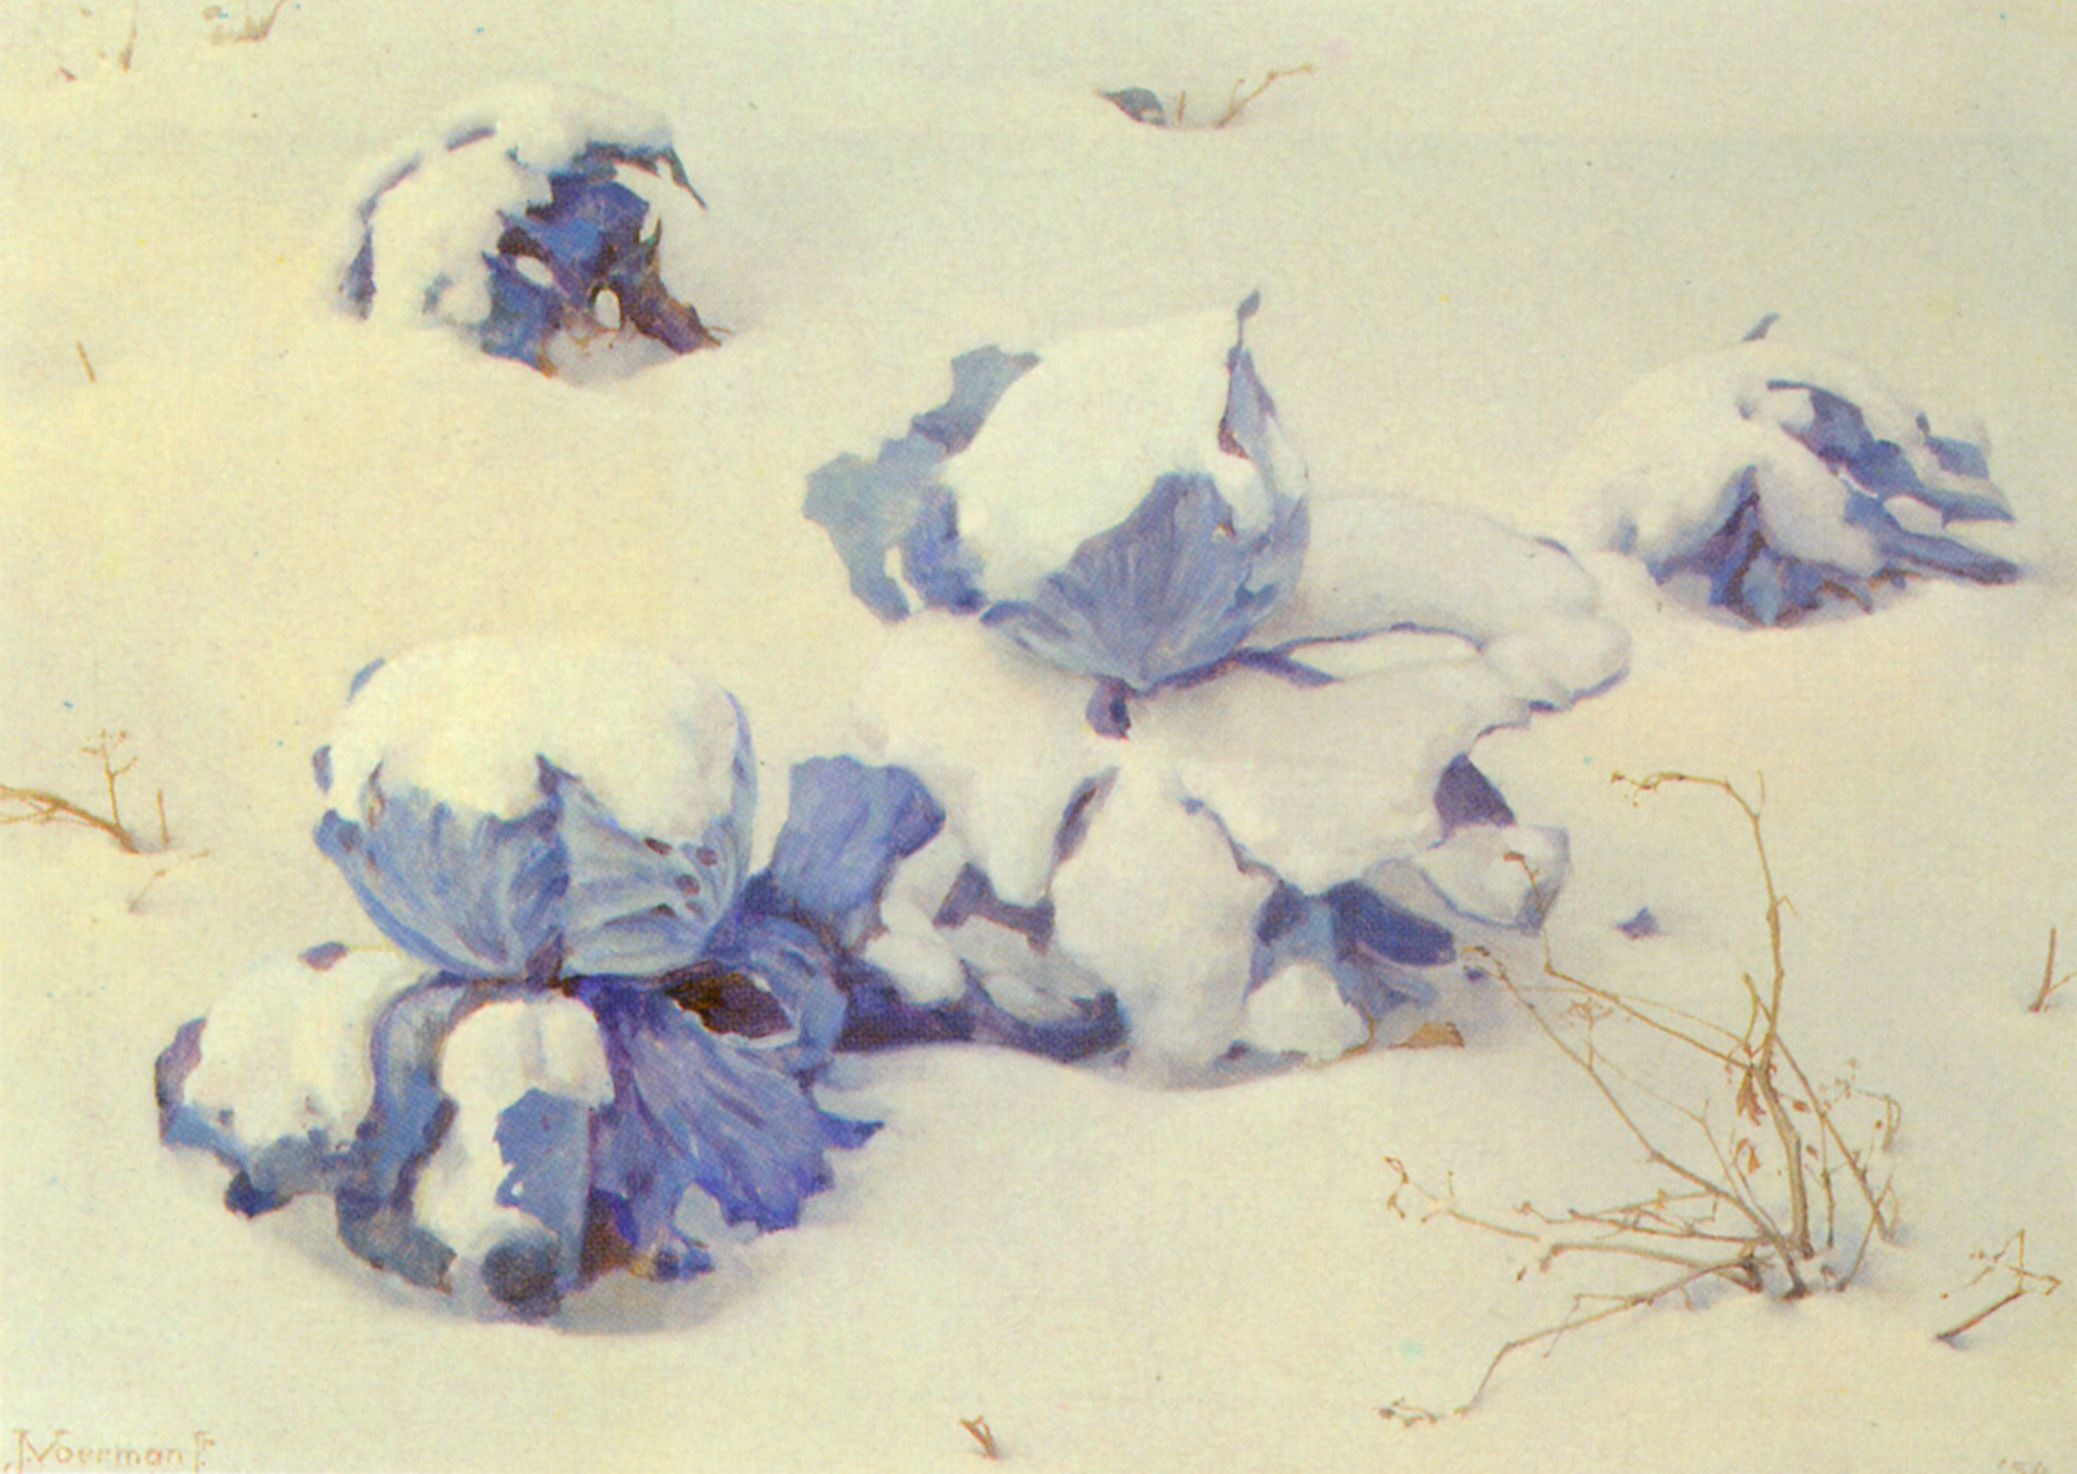 Blue Cabbages in the Snow by Jan Voerman Jr